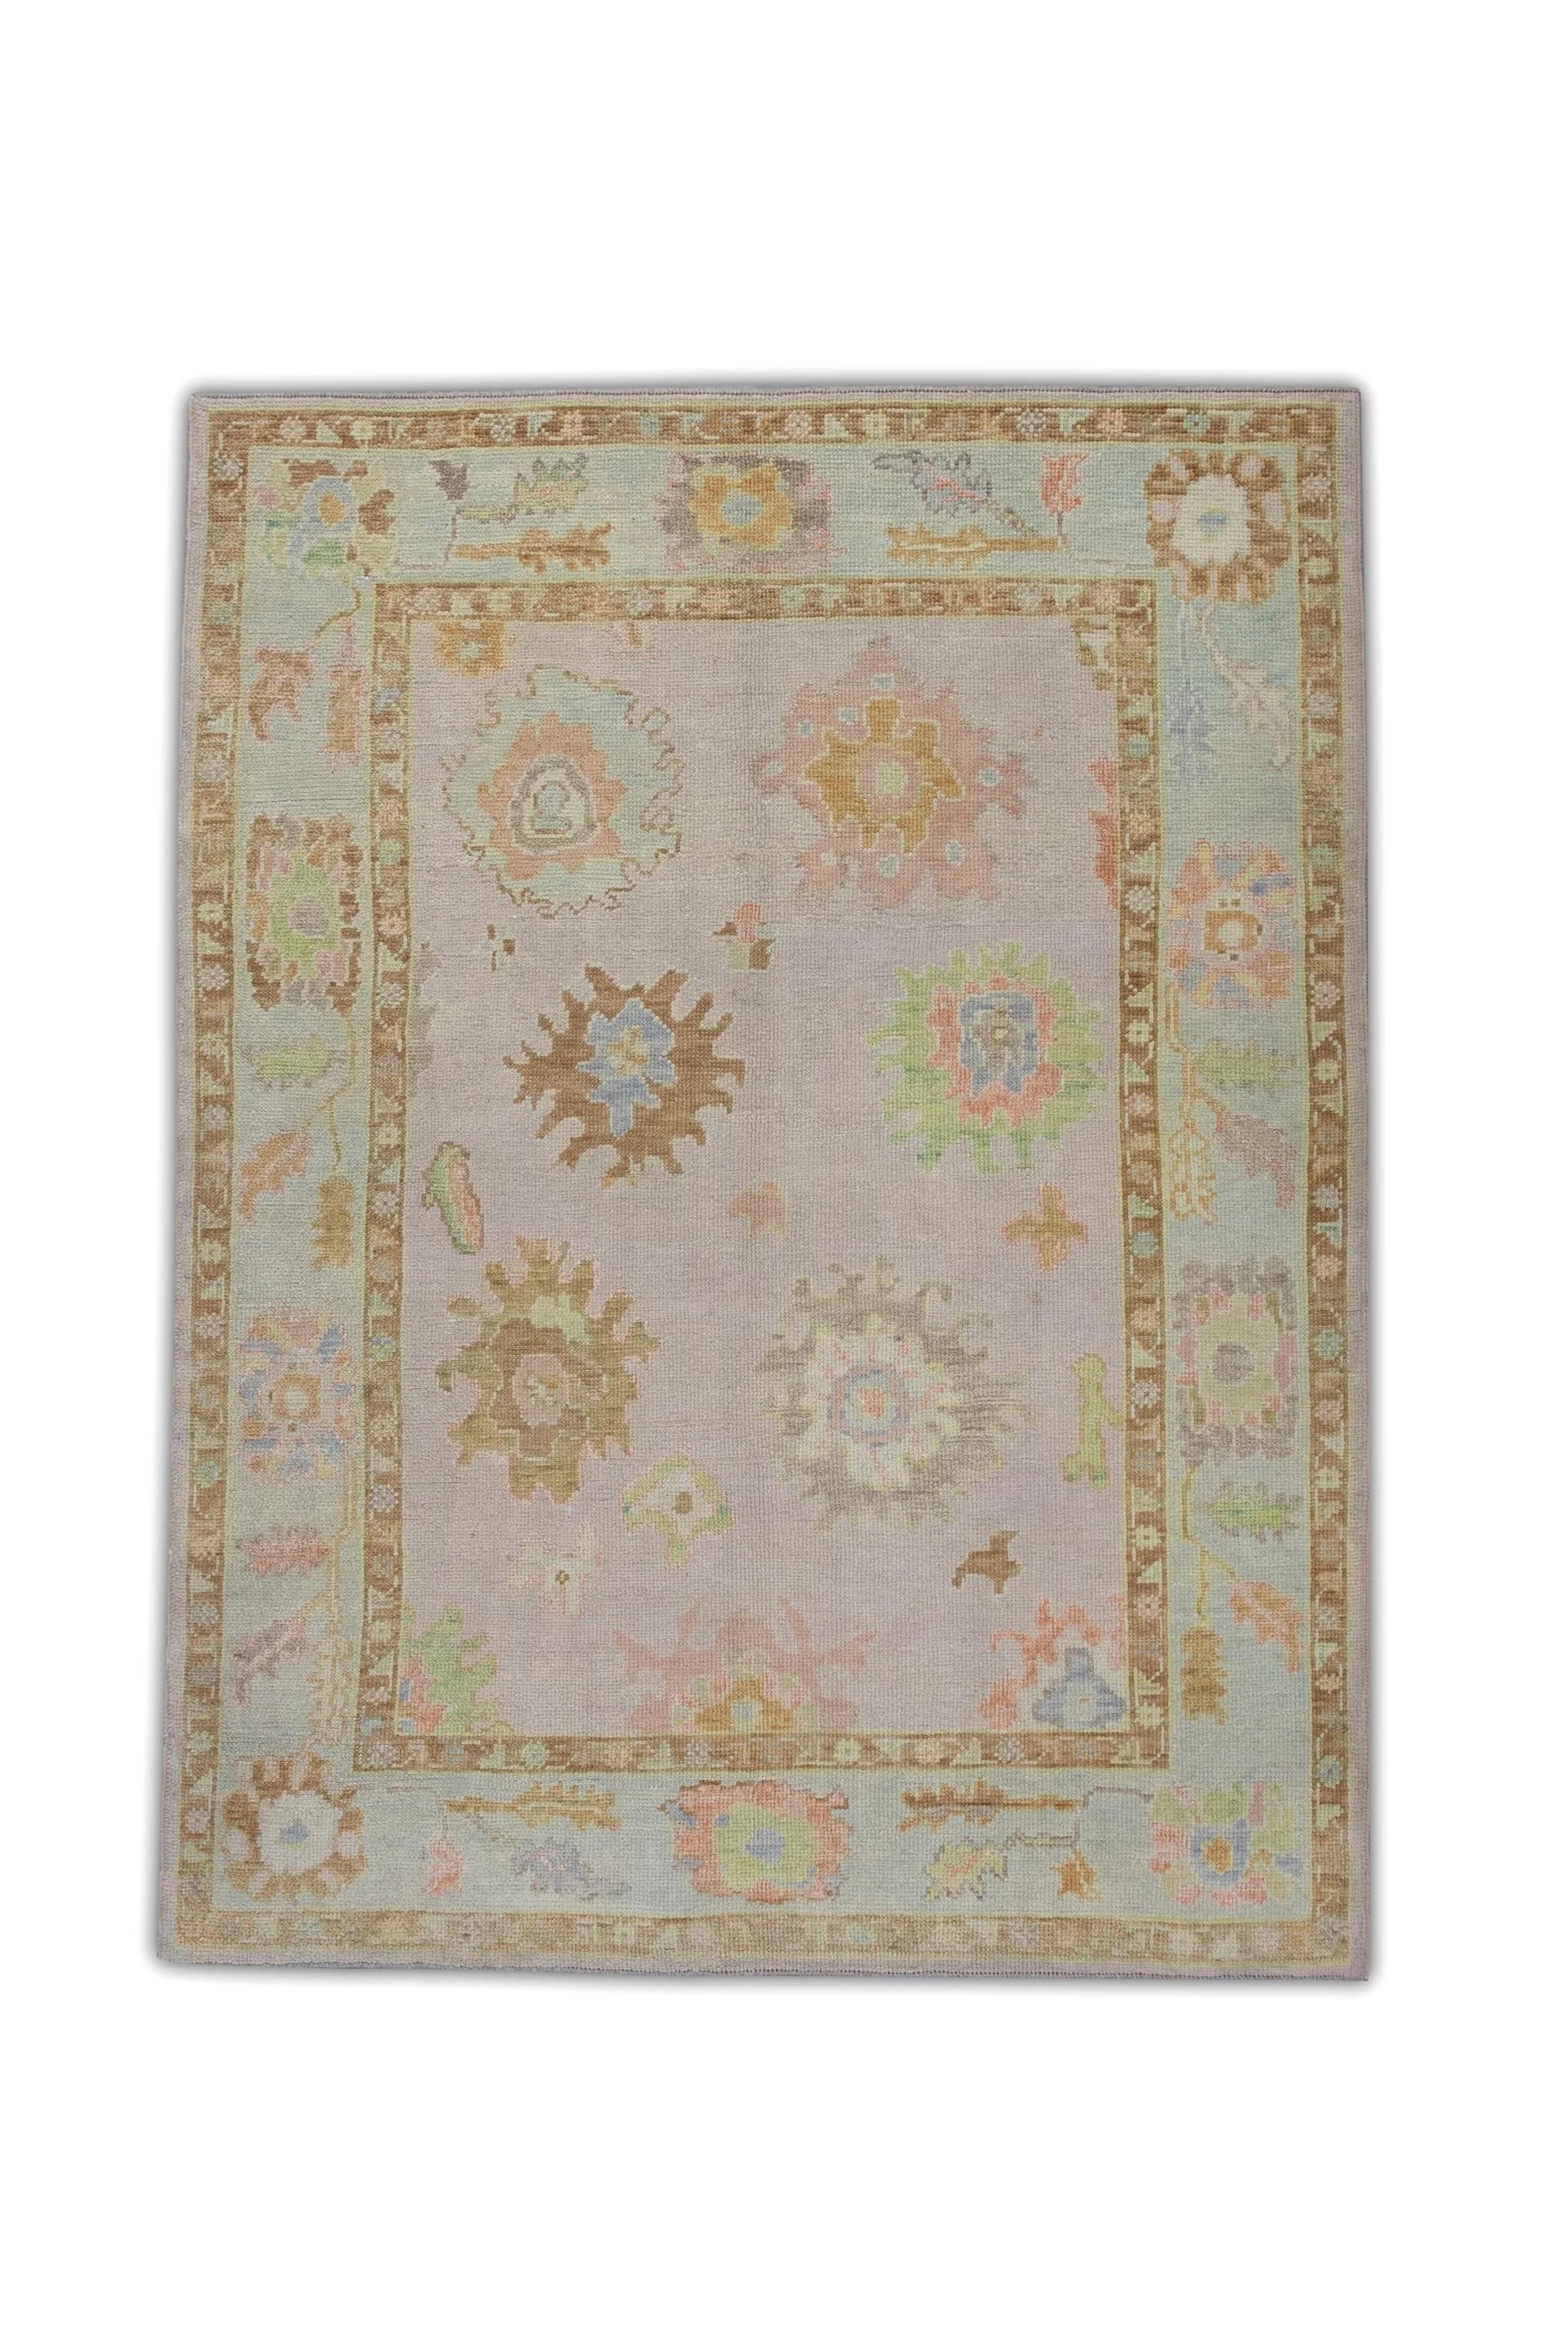 Multicolor Floral Handwoven Wool Turkish Oushak Rug 5' x 6'8